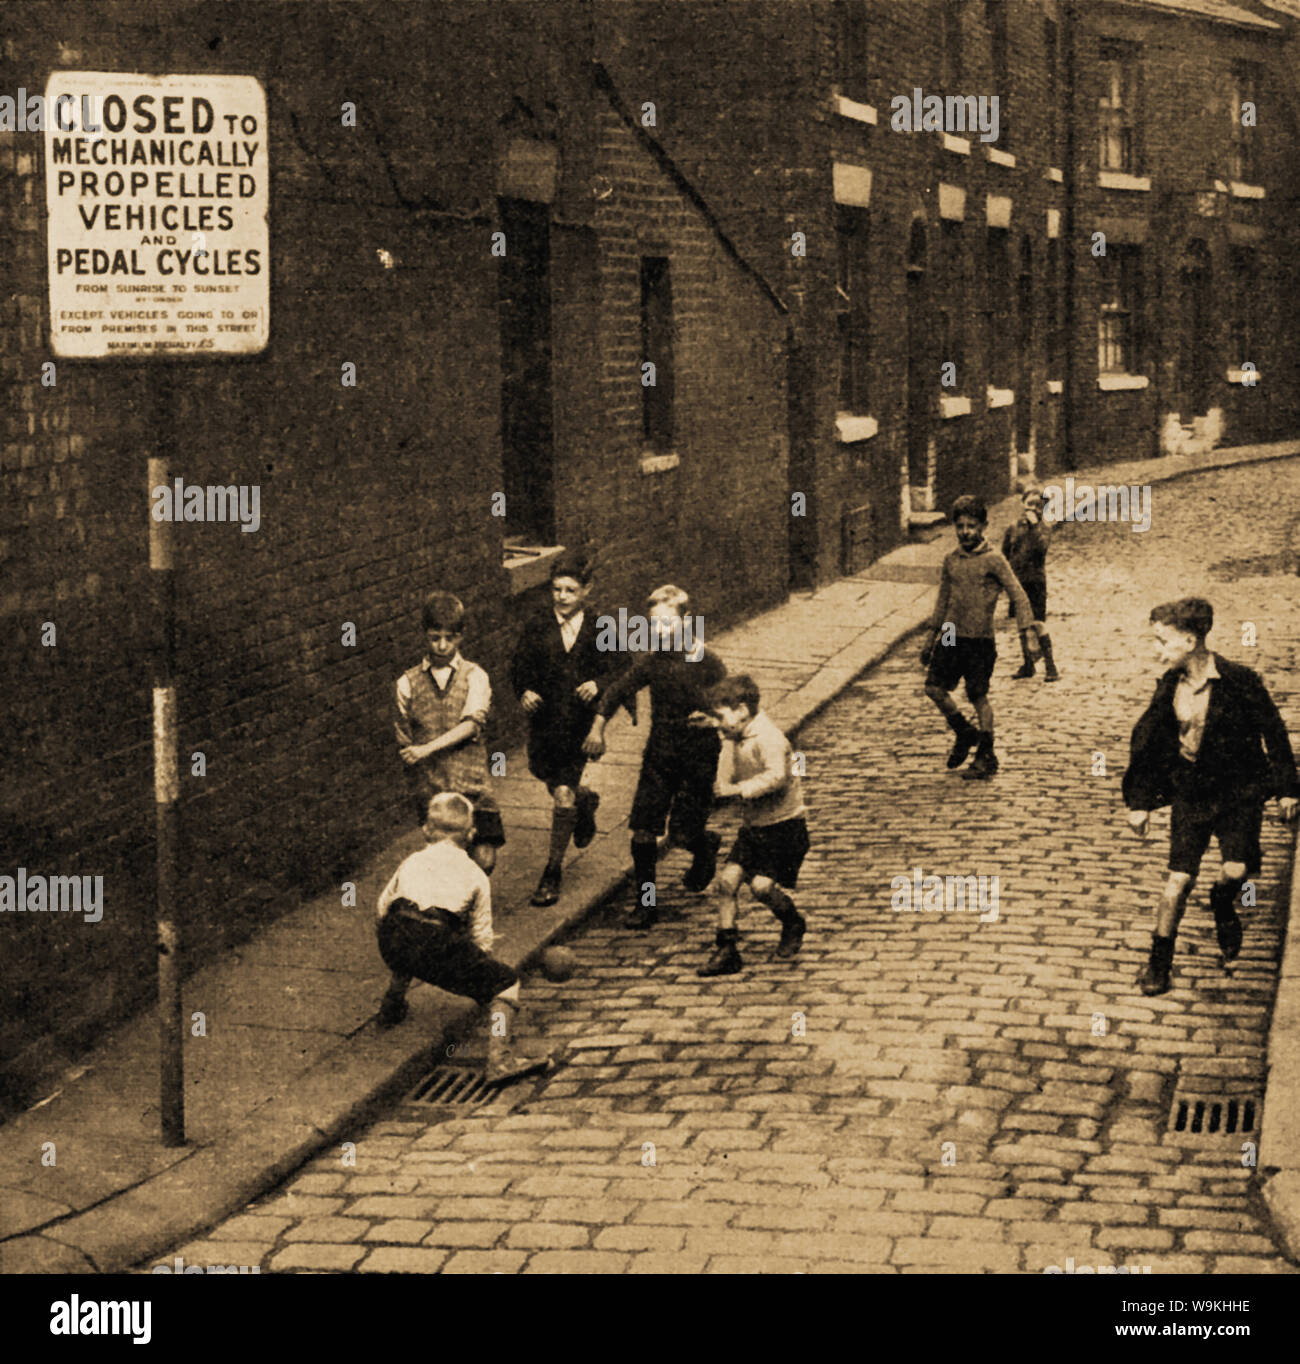 Circa 1940's - British school children from the north of England play football in the street - A sign prohibits all vehicles except those of residents to enter the cobbled street Stock Photo